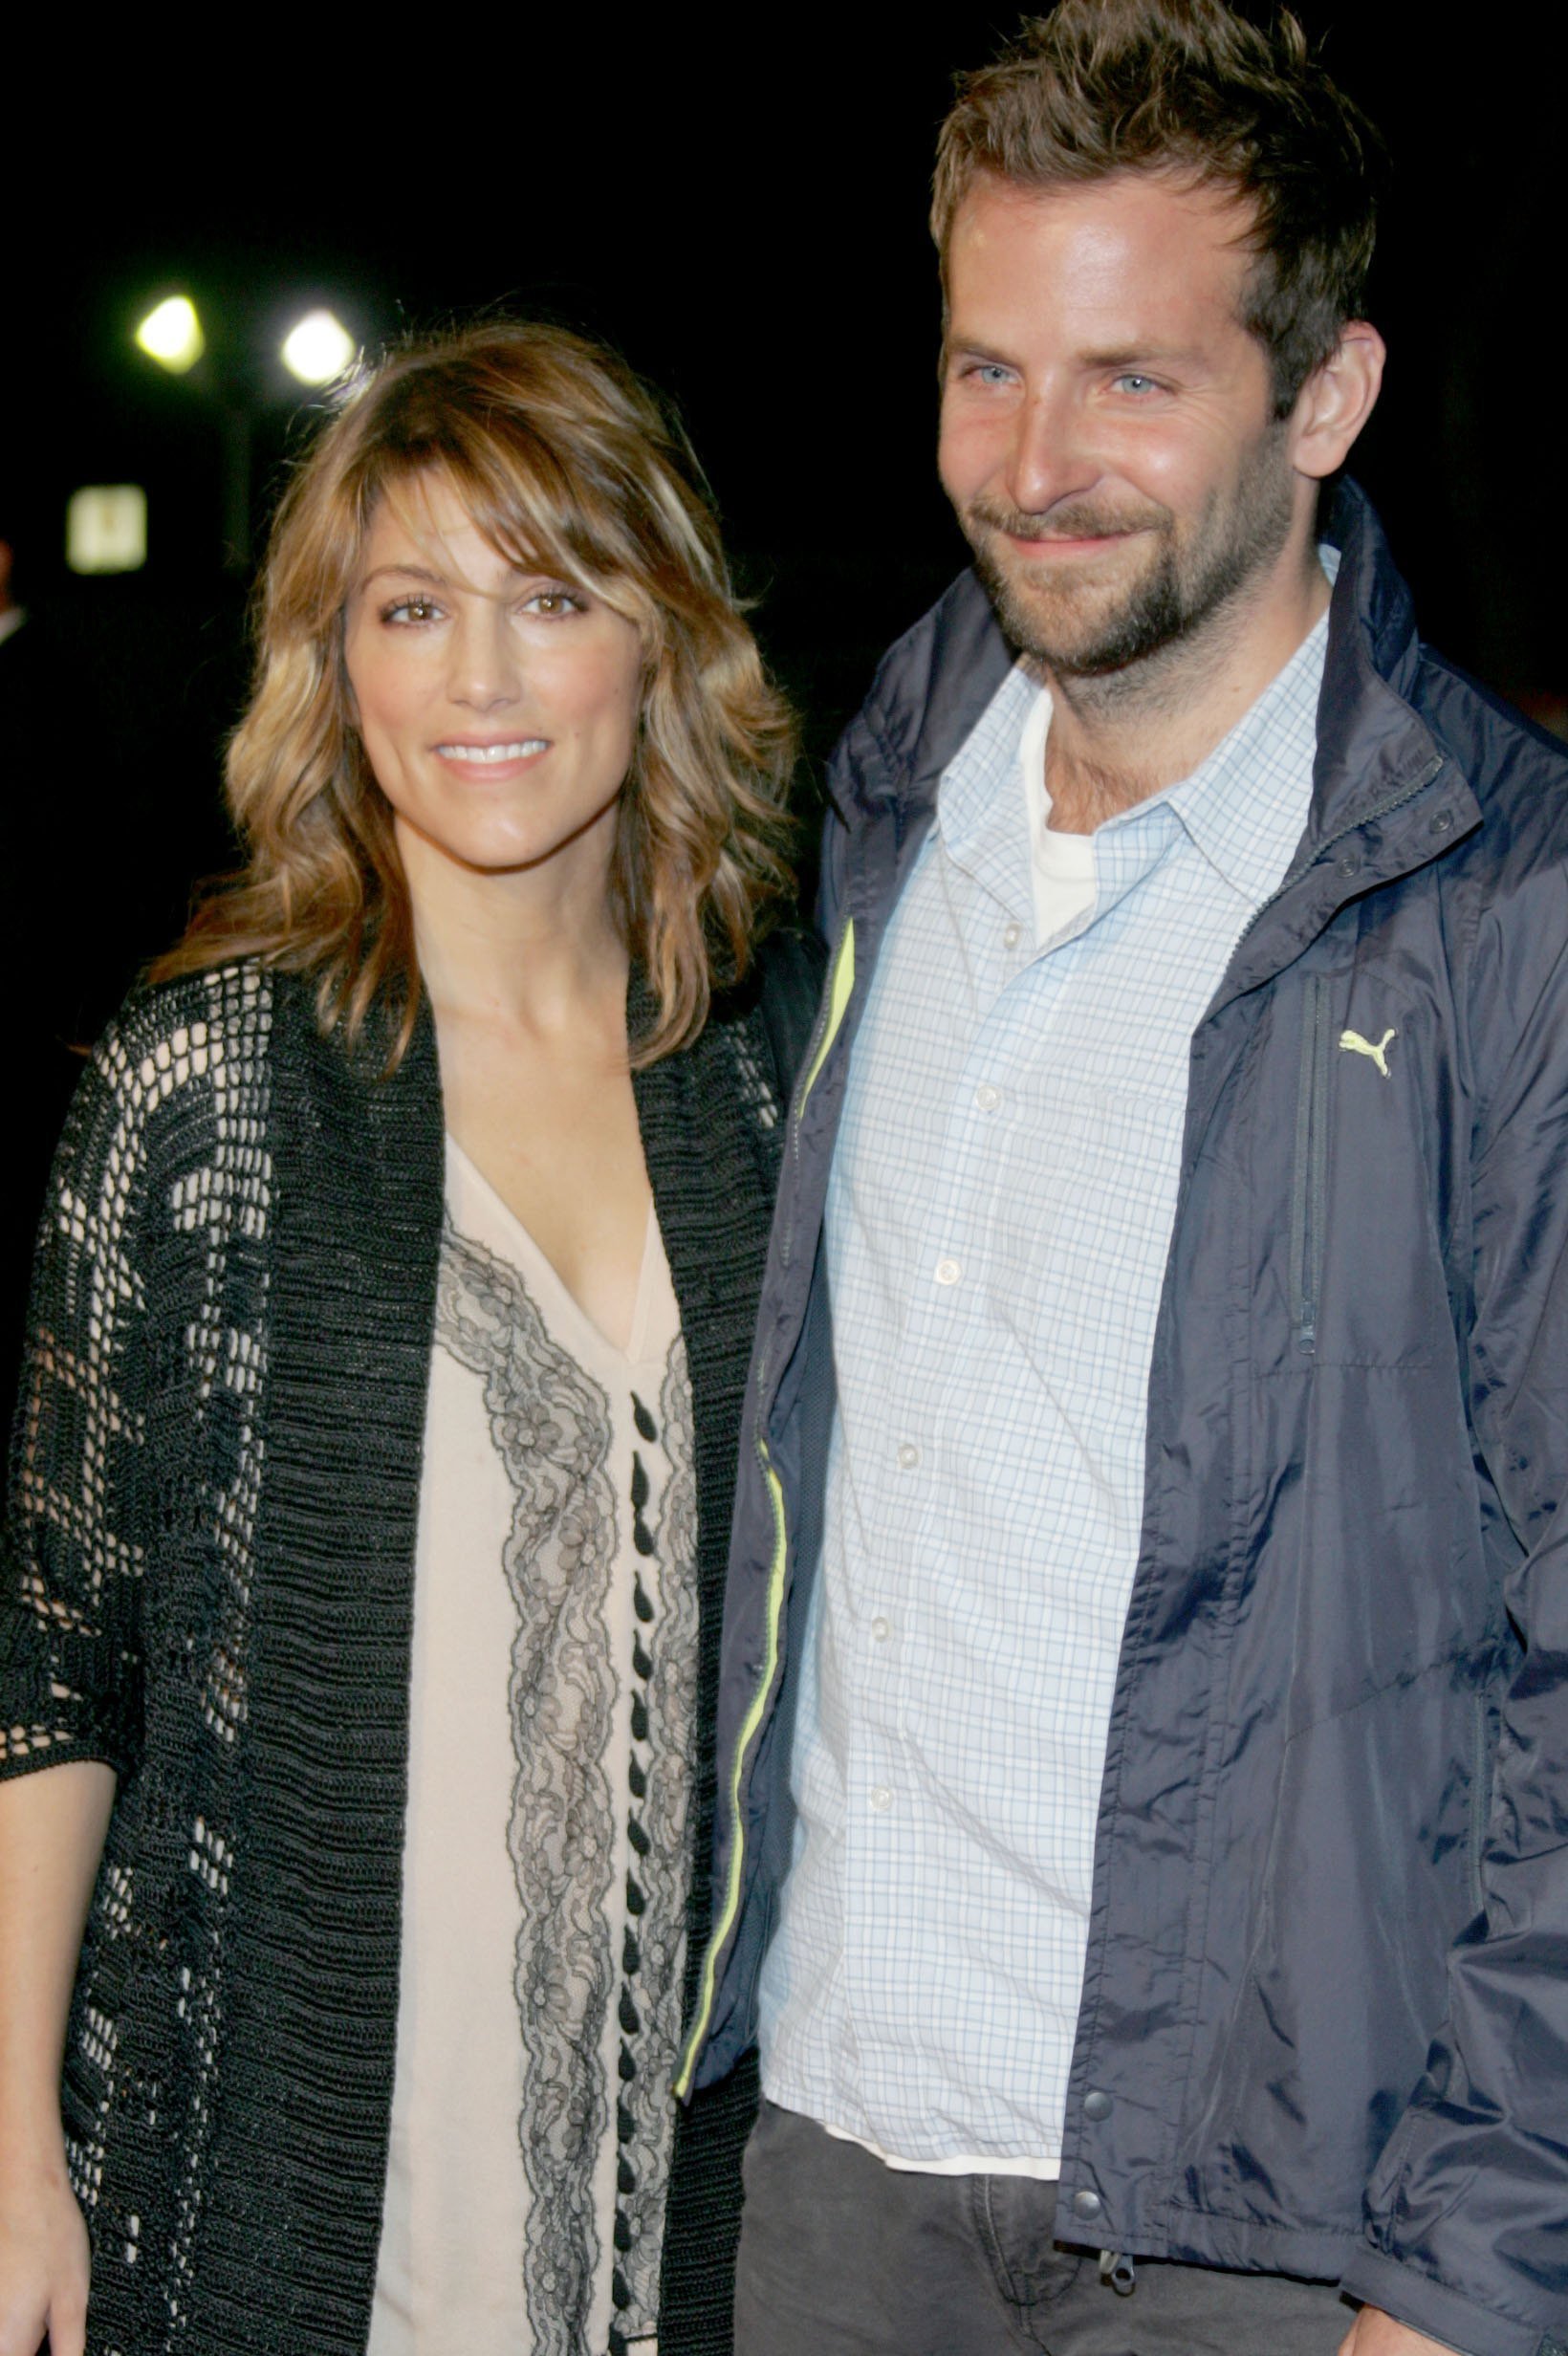 Jennifer Esposito and Bradley Cooper attending the Paramount Vantage premiere of 'Babel' in 2014 | Photo: Getty Images